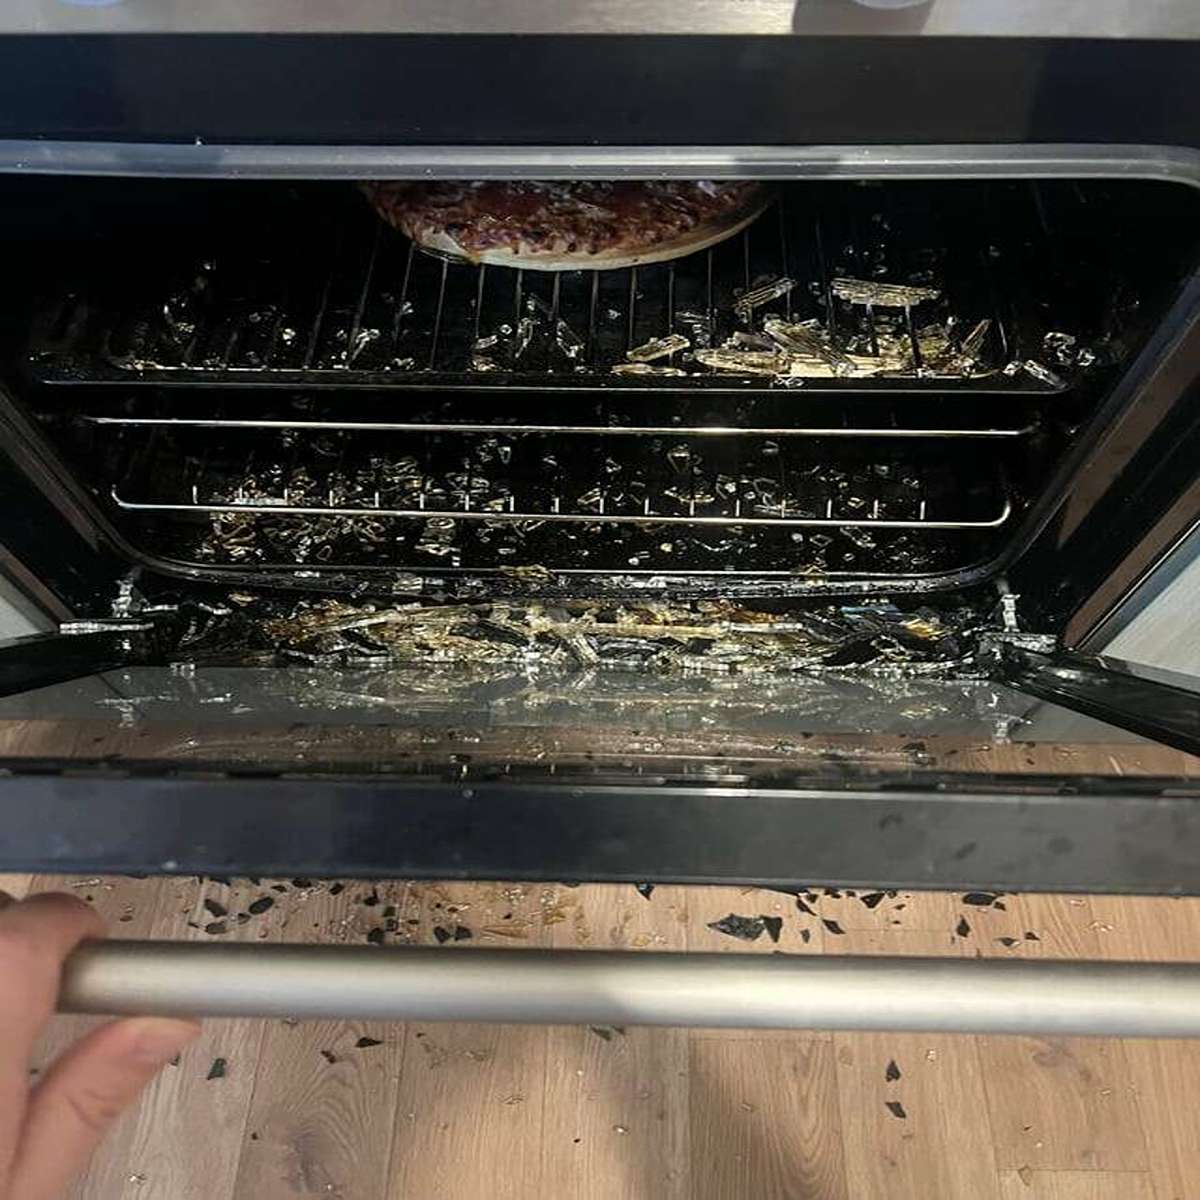 Pizza and oven door ruined in one fail swoop.